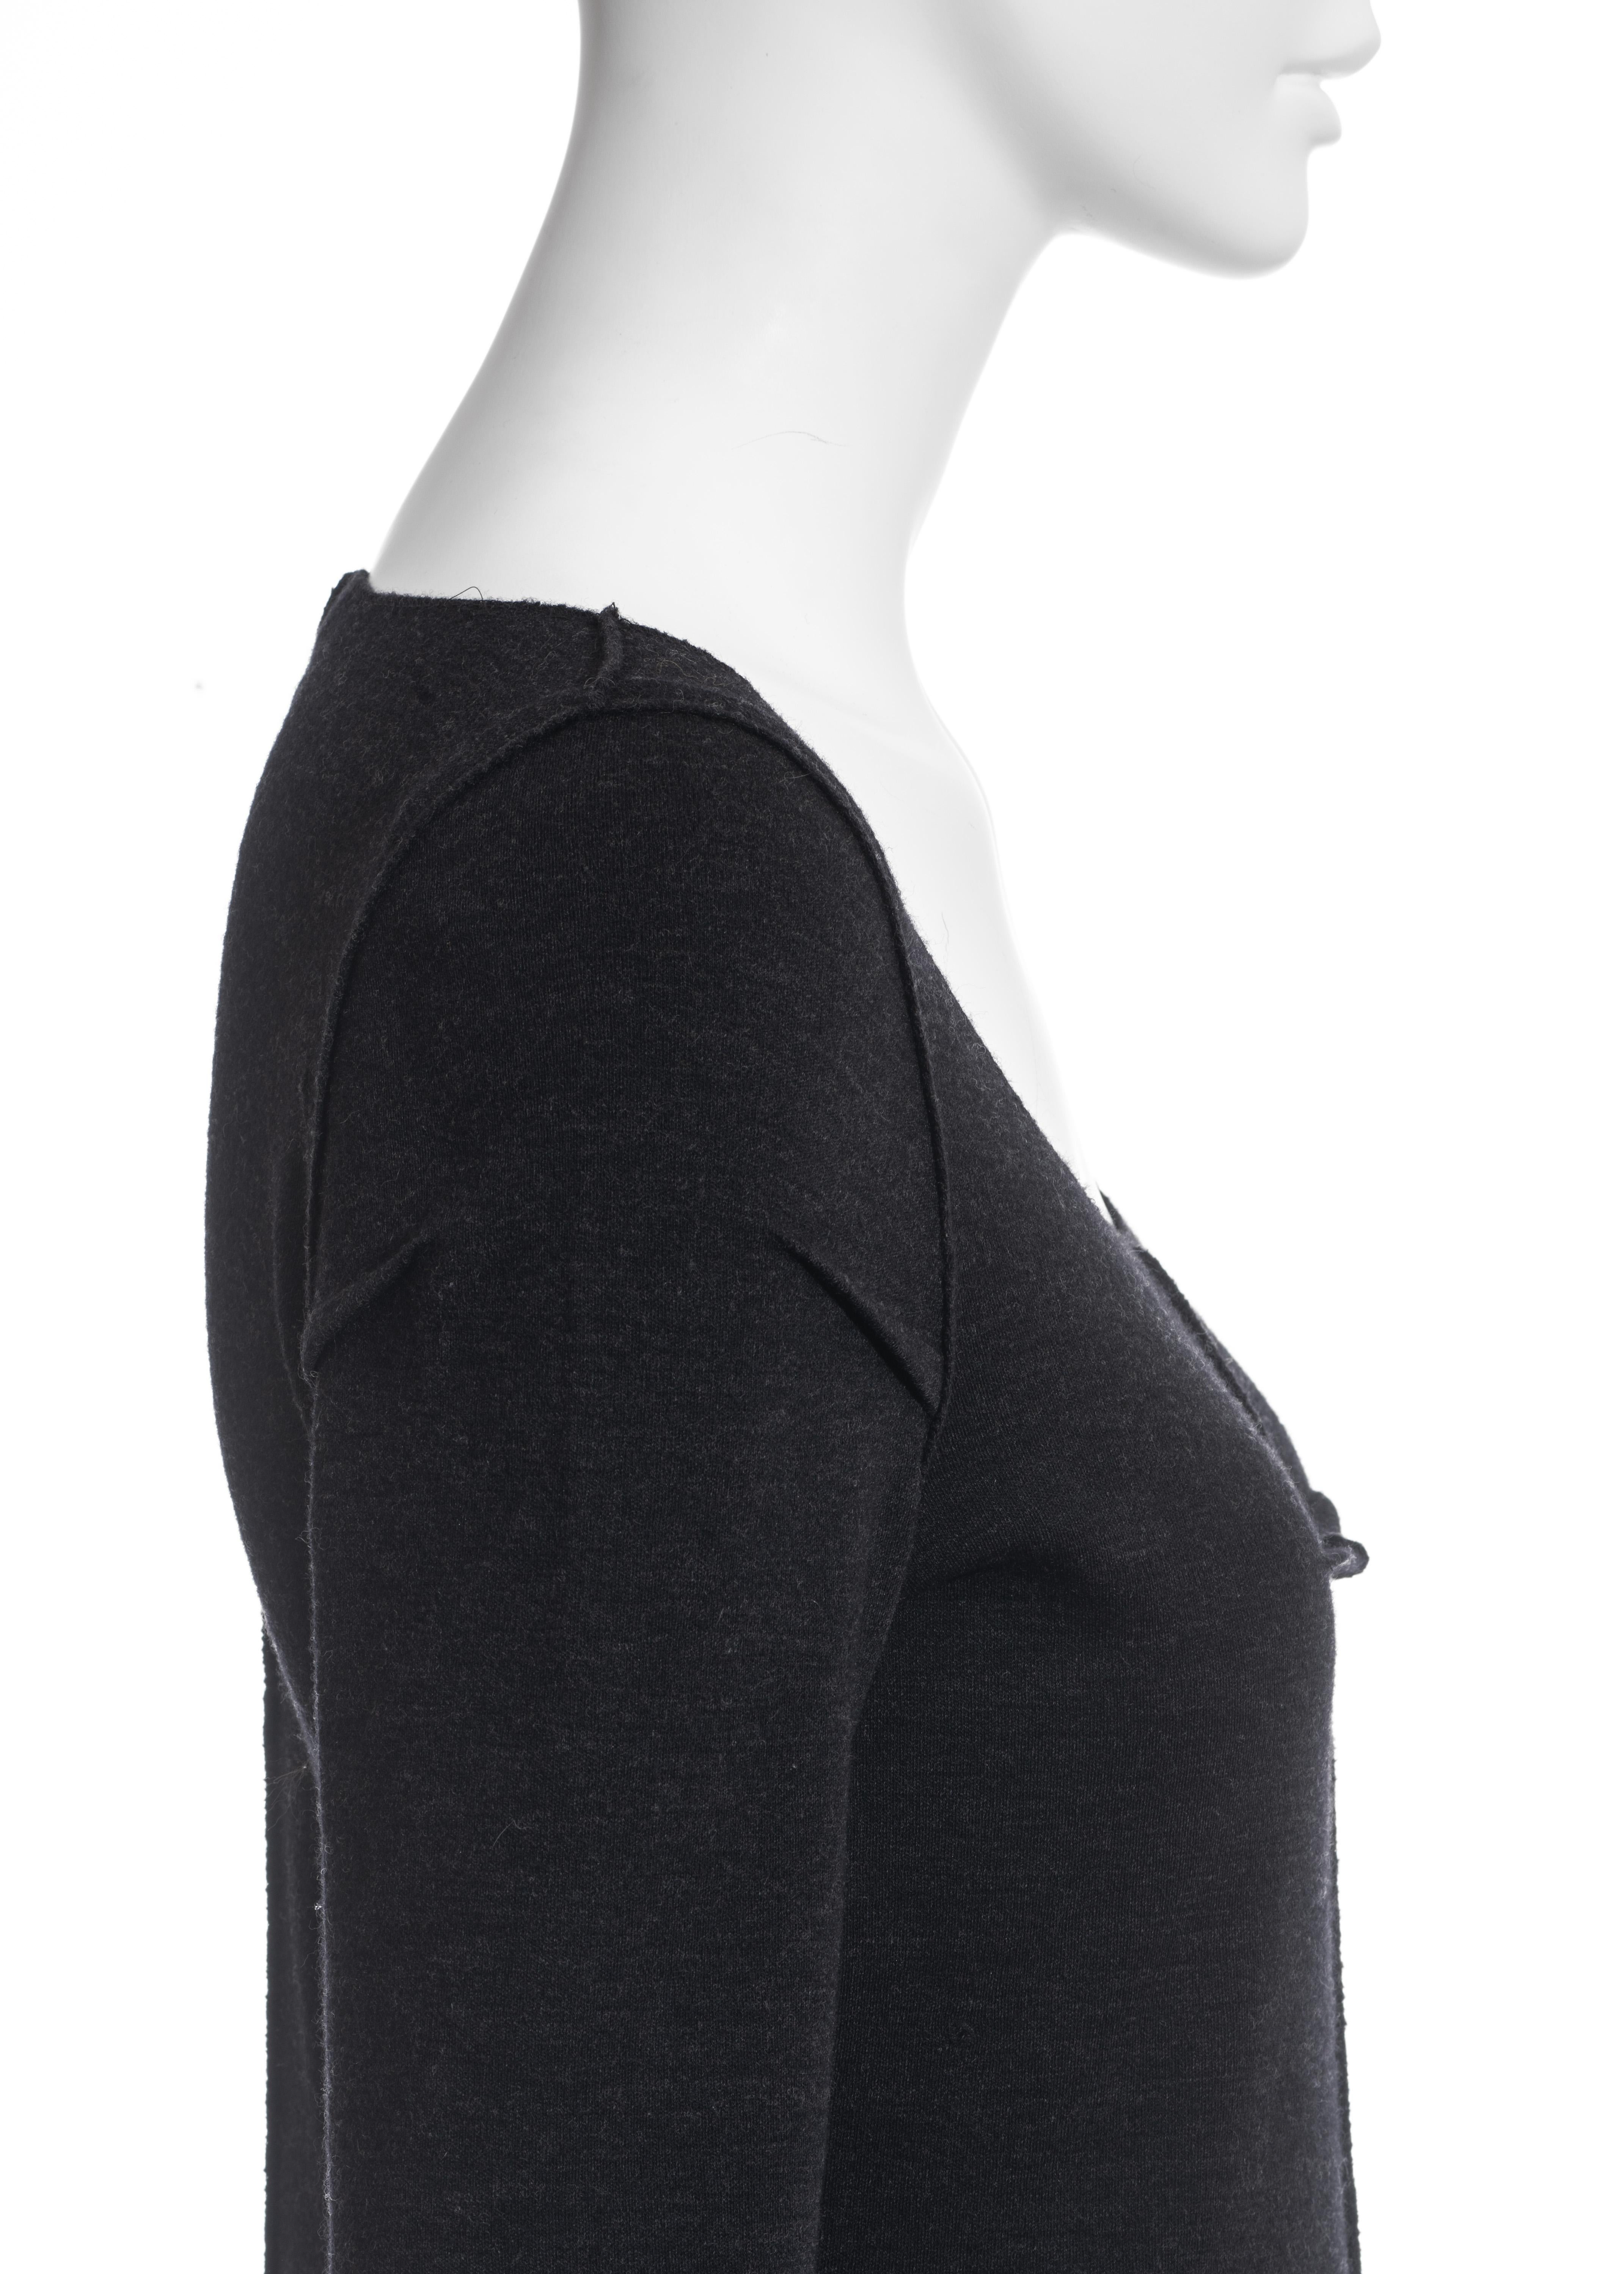 Women's Margiela grey wool jersey sweater with inverted darts, fw 1989 For Sale